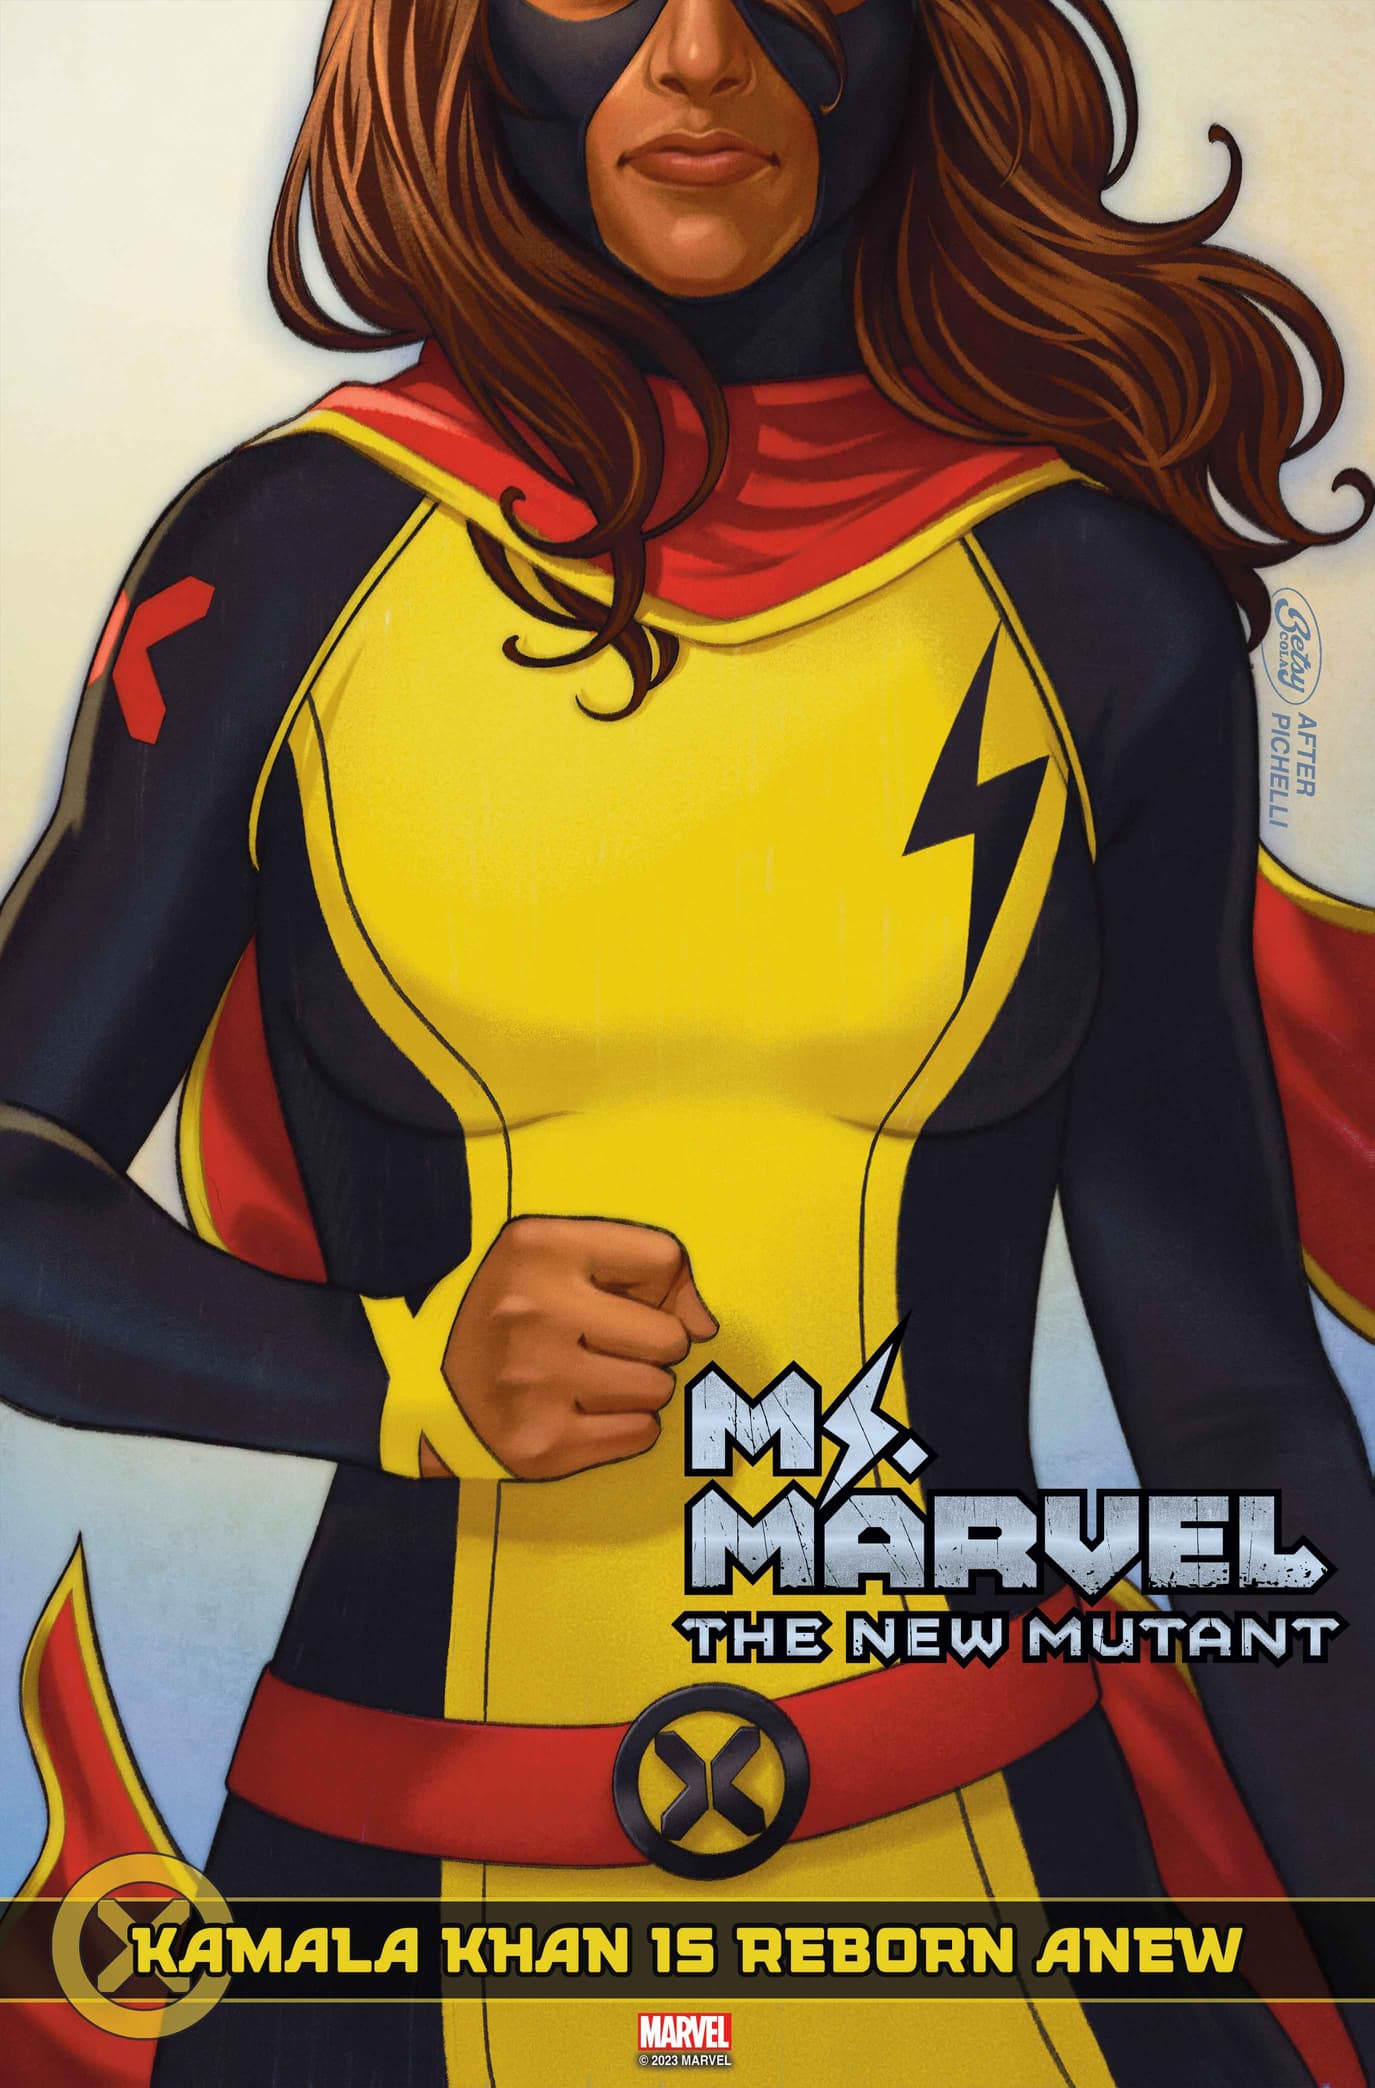 MS. MARVEL: THE NEW MUTANT #1 Homage Variant Cover by Betsy Cola